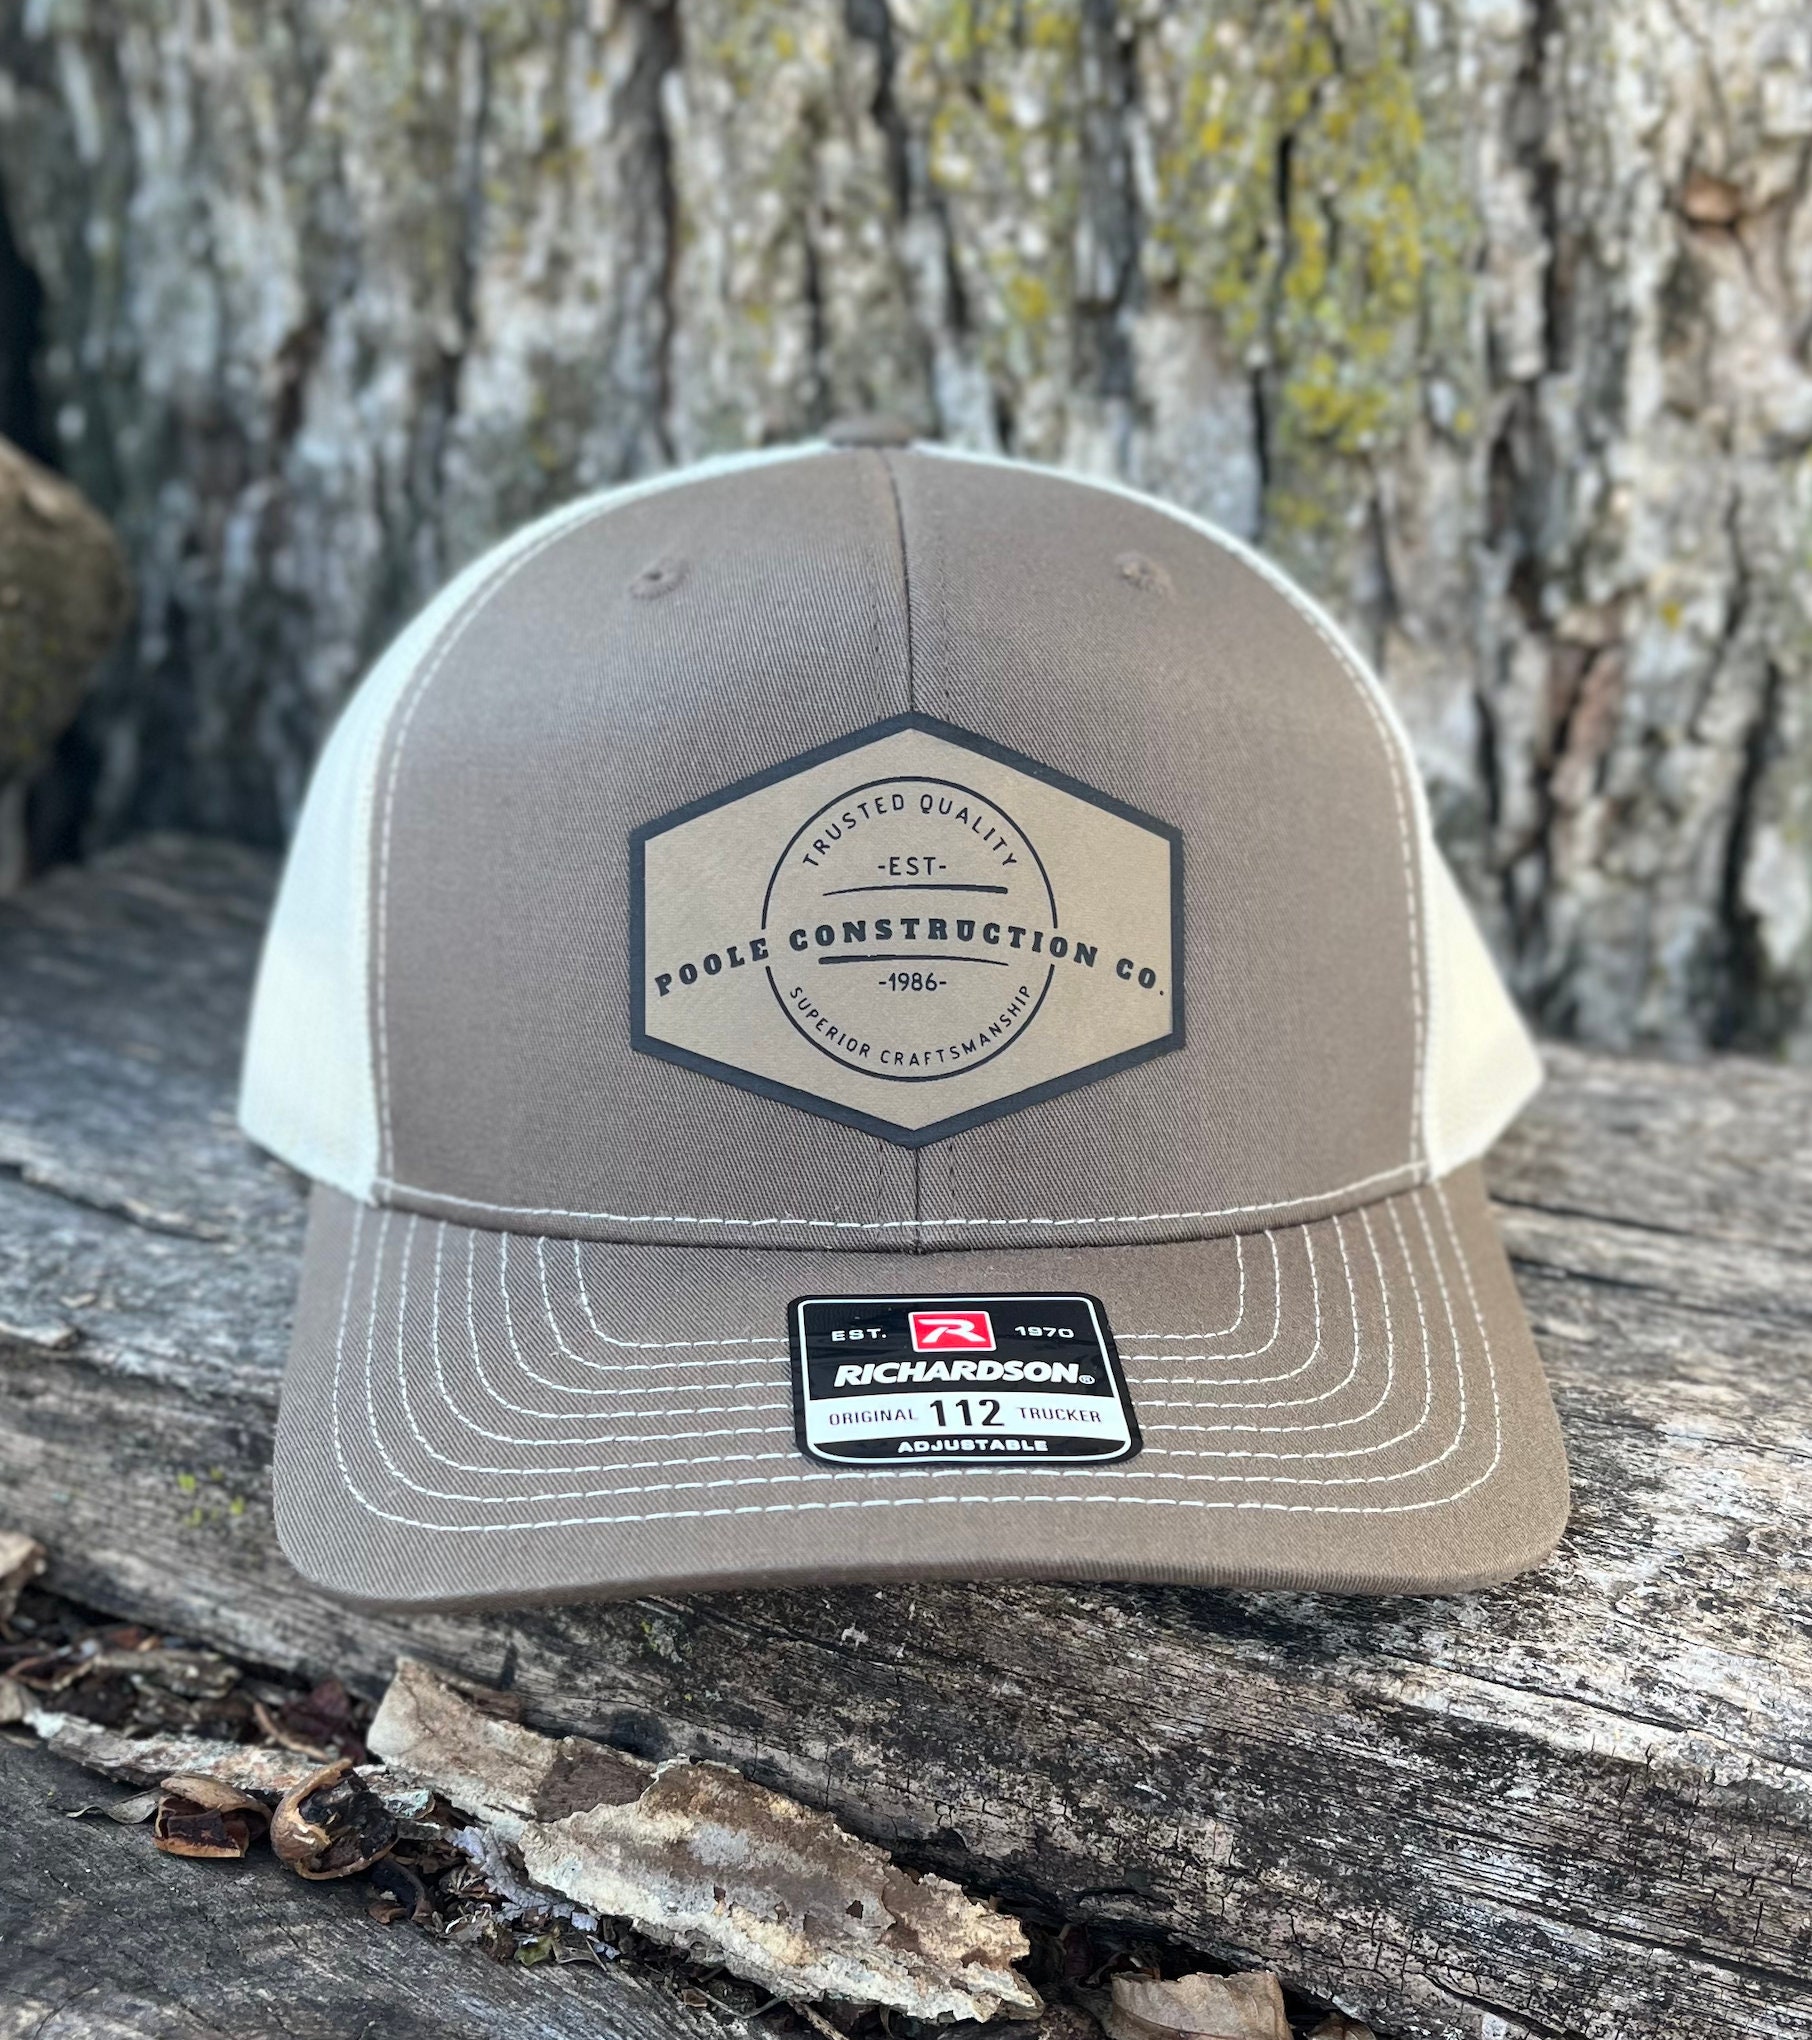 Richardson Lined Waterman Hat, Solid Olive/Green Camo / OSFM